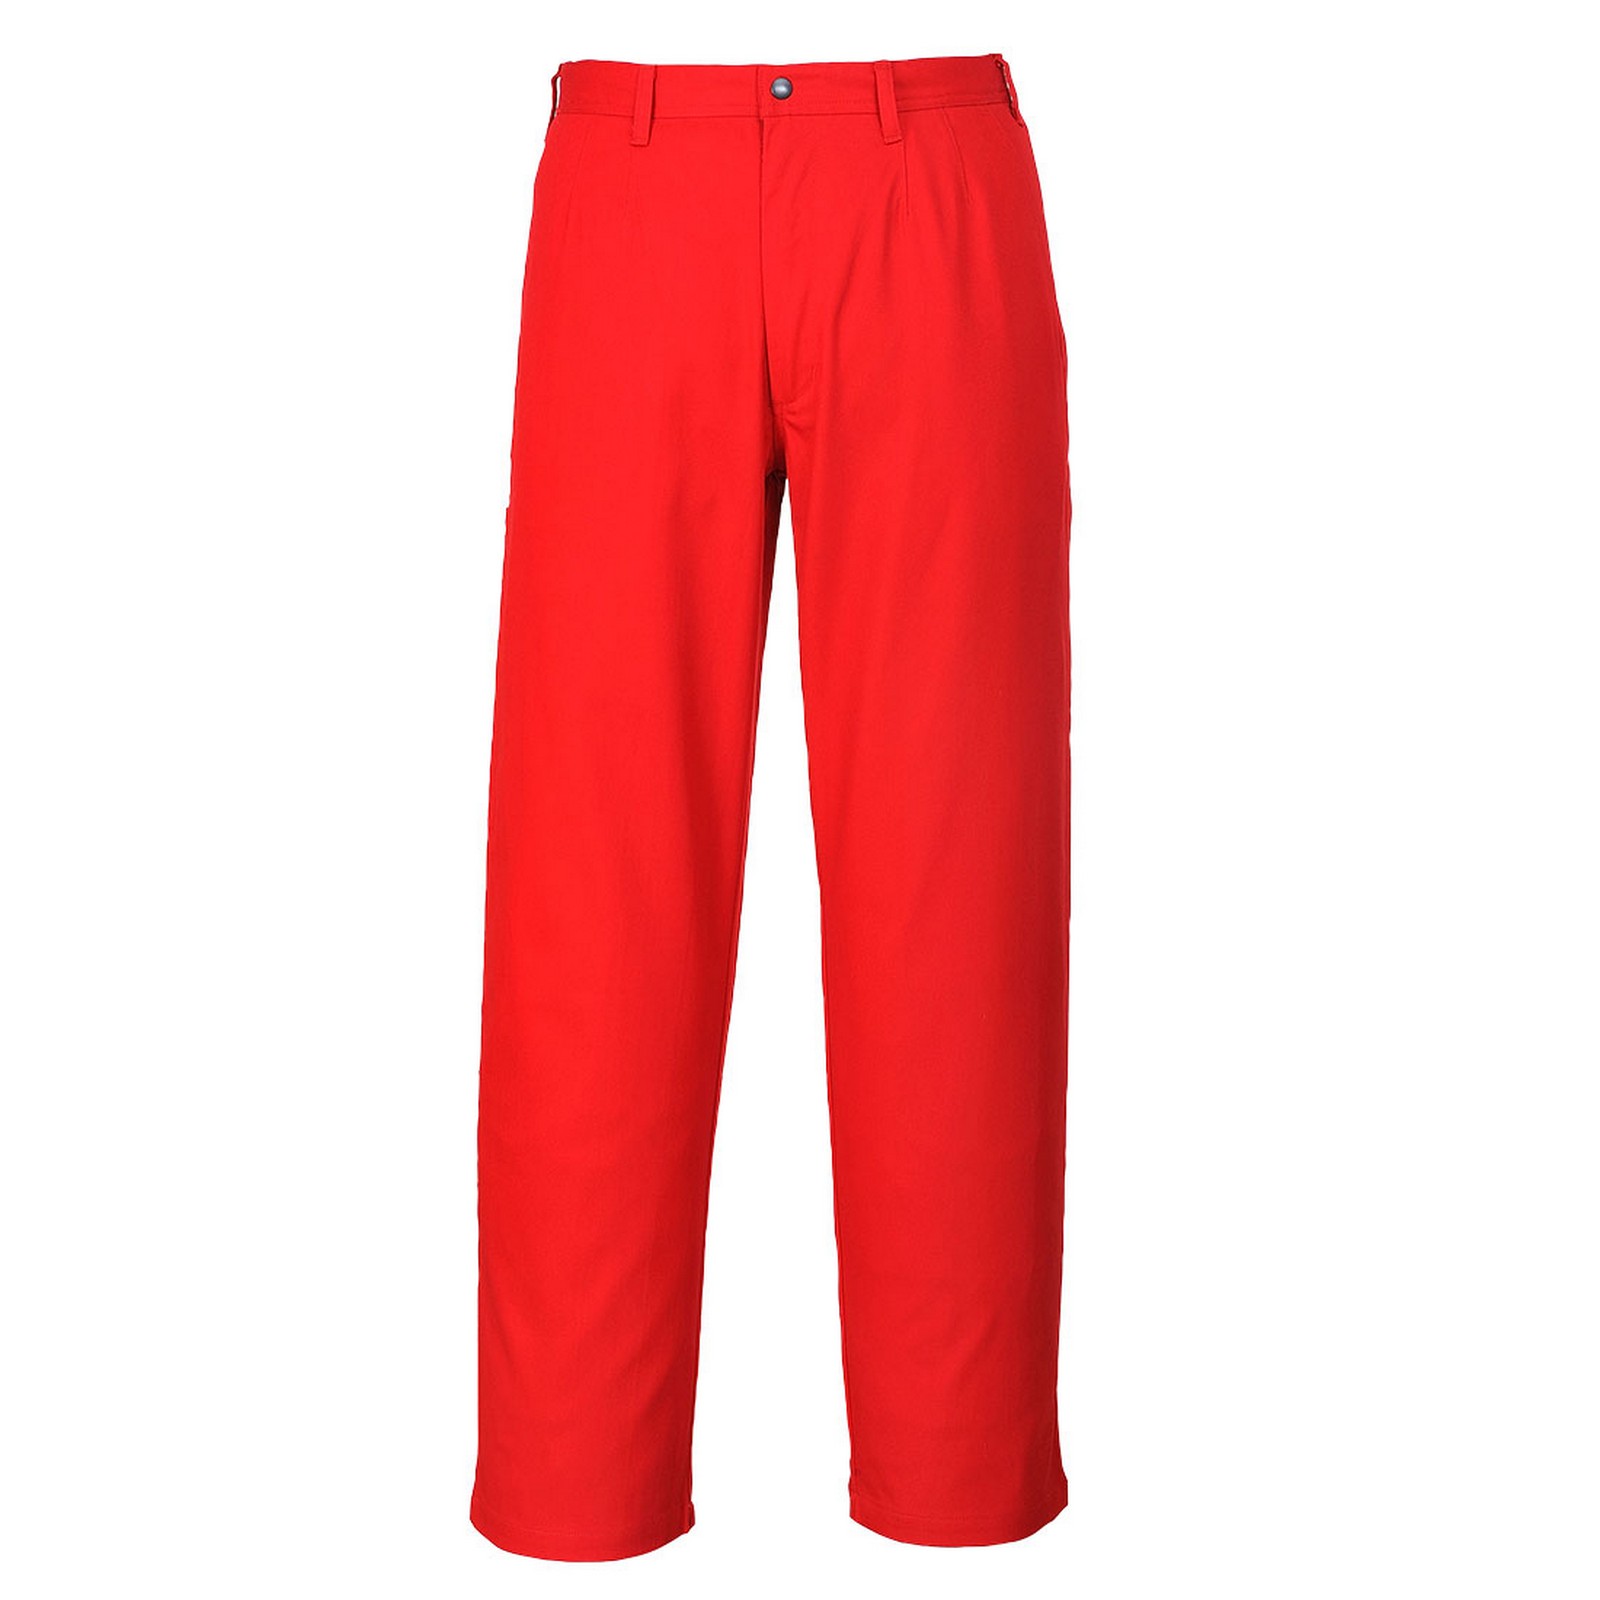 Flame retardant trousers | WISE Worksafe